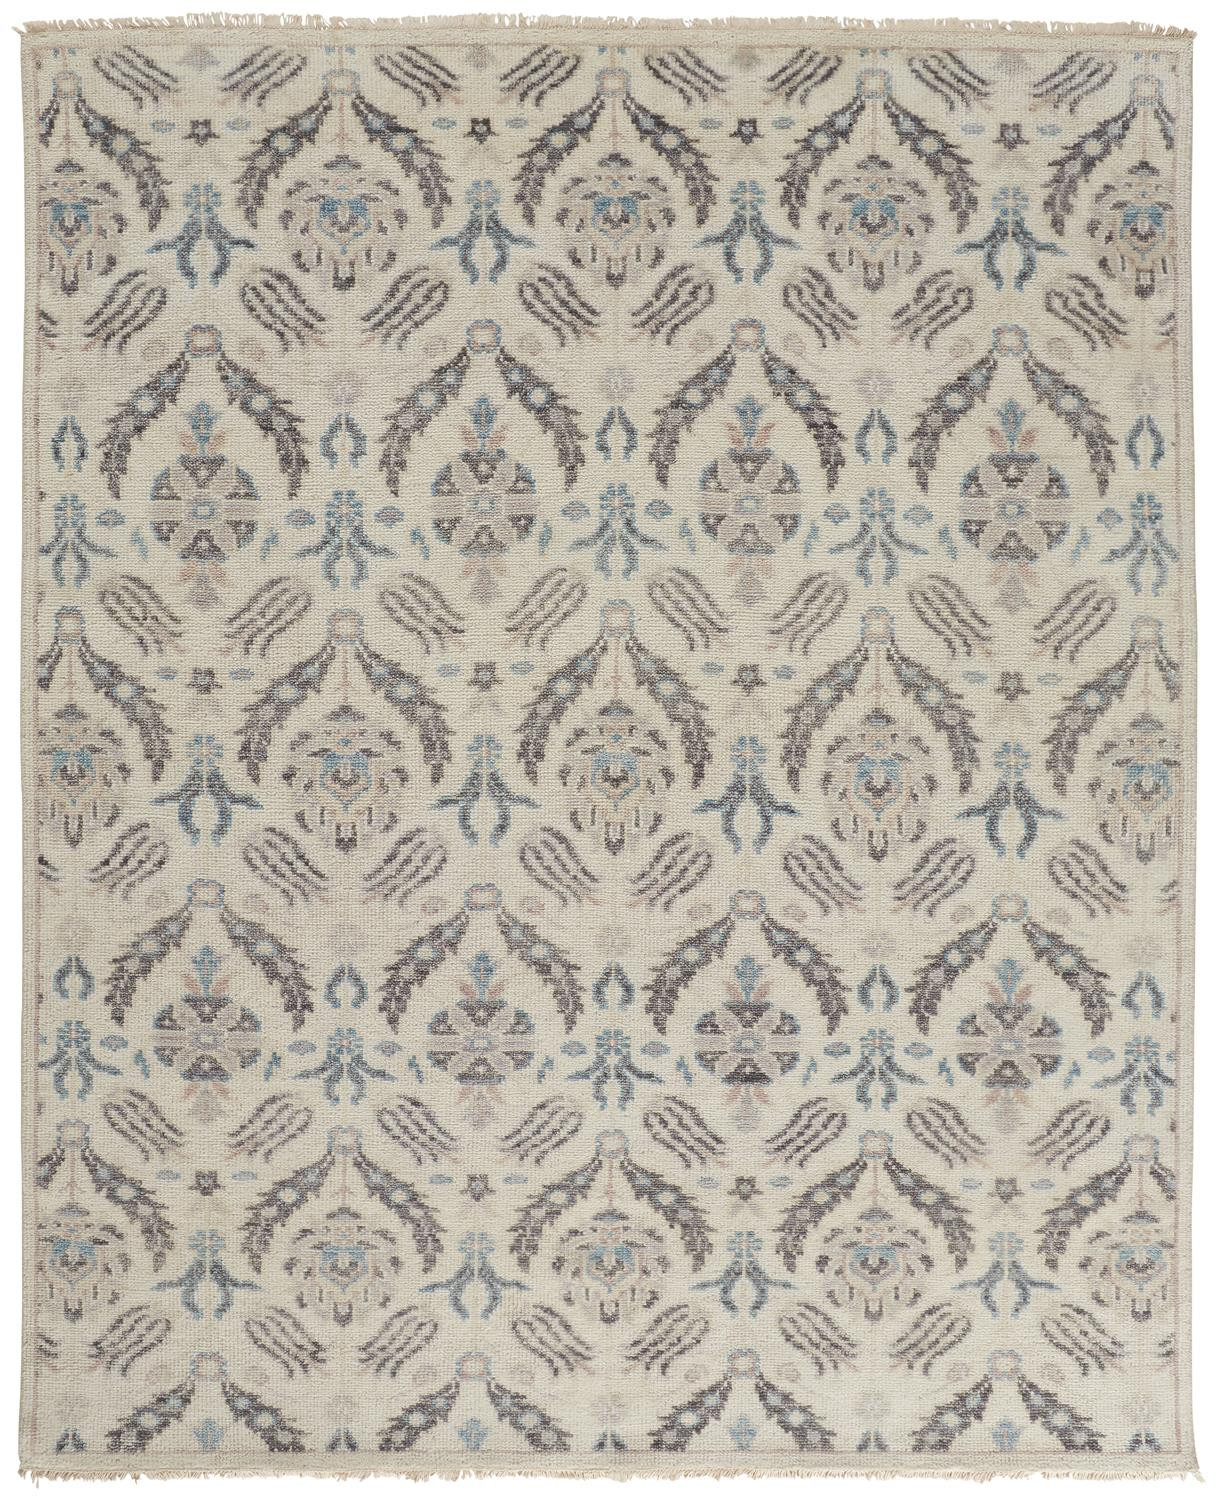 9' X 12' Ivory Gray And Blue Wool Floral Hand Knotted Stain Resistant Area Rug-513097-1